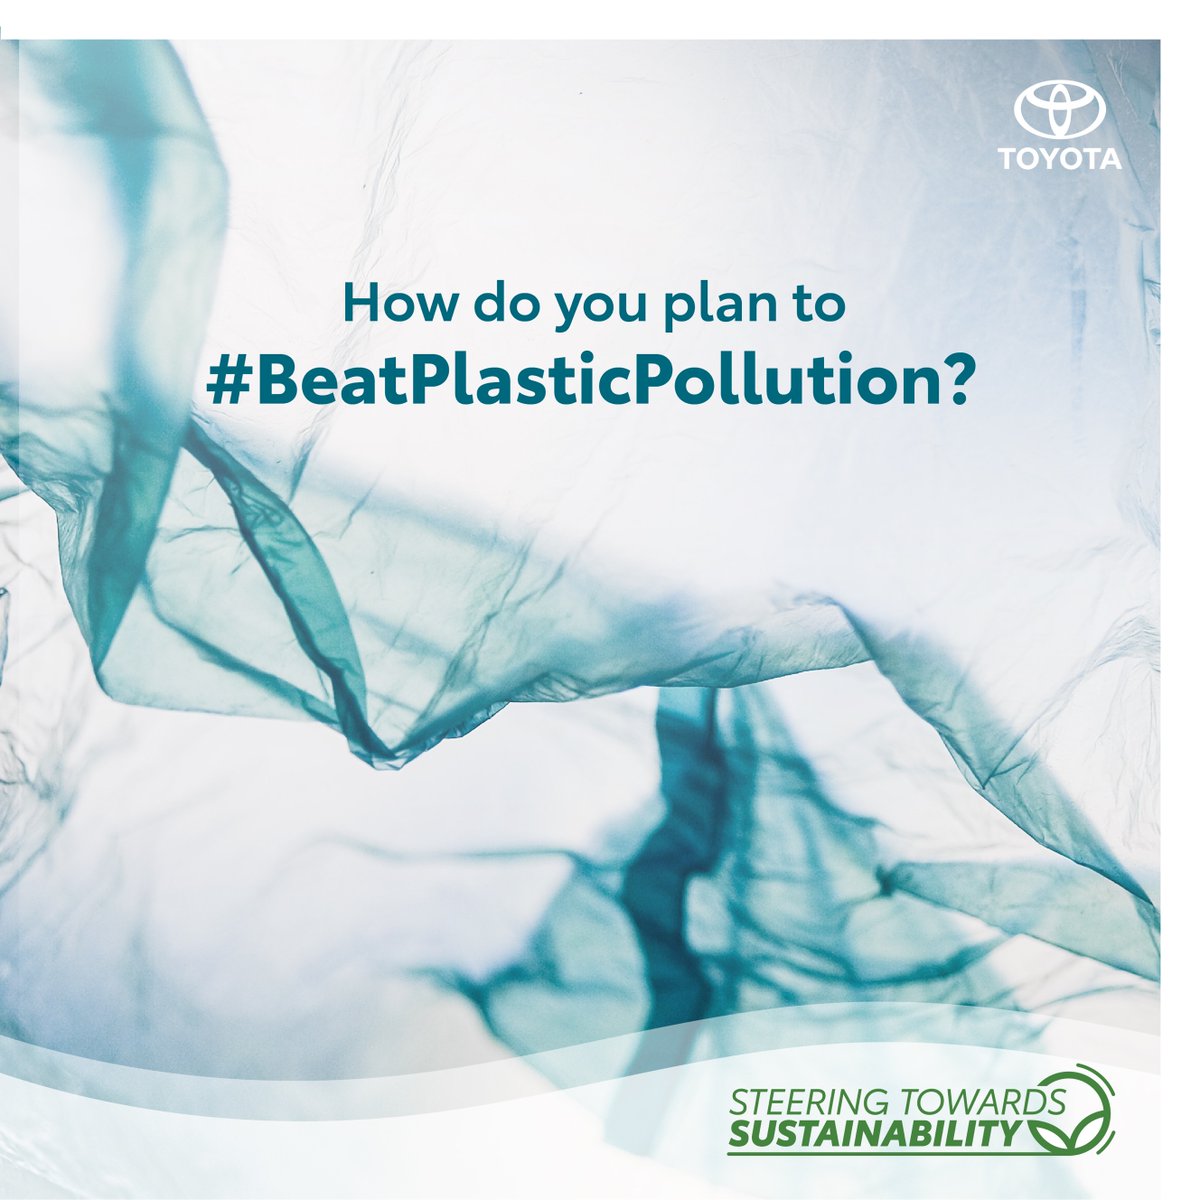 Plastic pollution poses significant threats to ecosystems, wildlife and human health, making it essential to address the United Nations’ theme for this year’s World Environment Day - #BeatPlasticPollution. Retweet this and let us know your way of contributing to this goal.